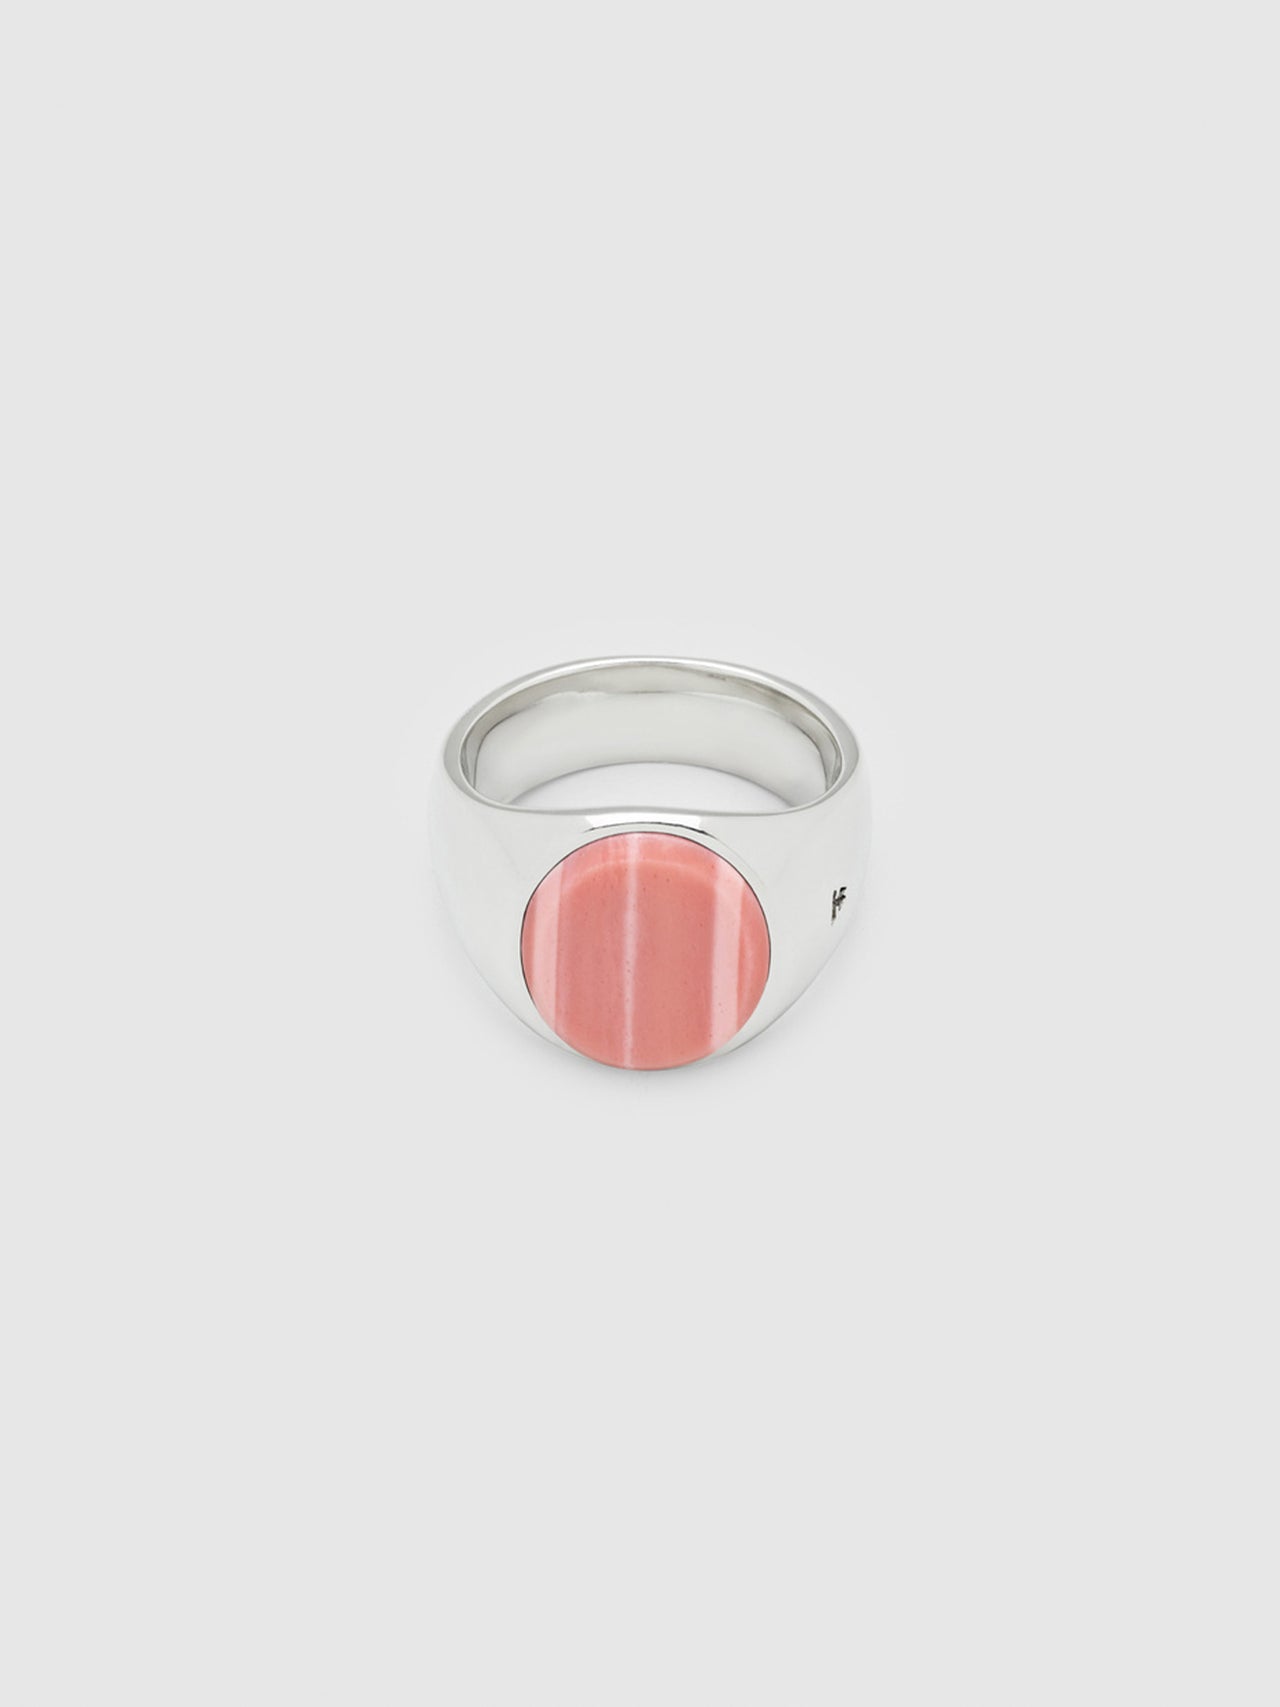 TOMWOOD / Oval Ring (PINK OPAL)